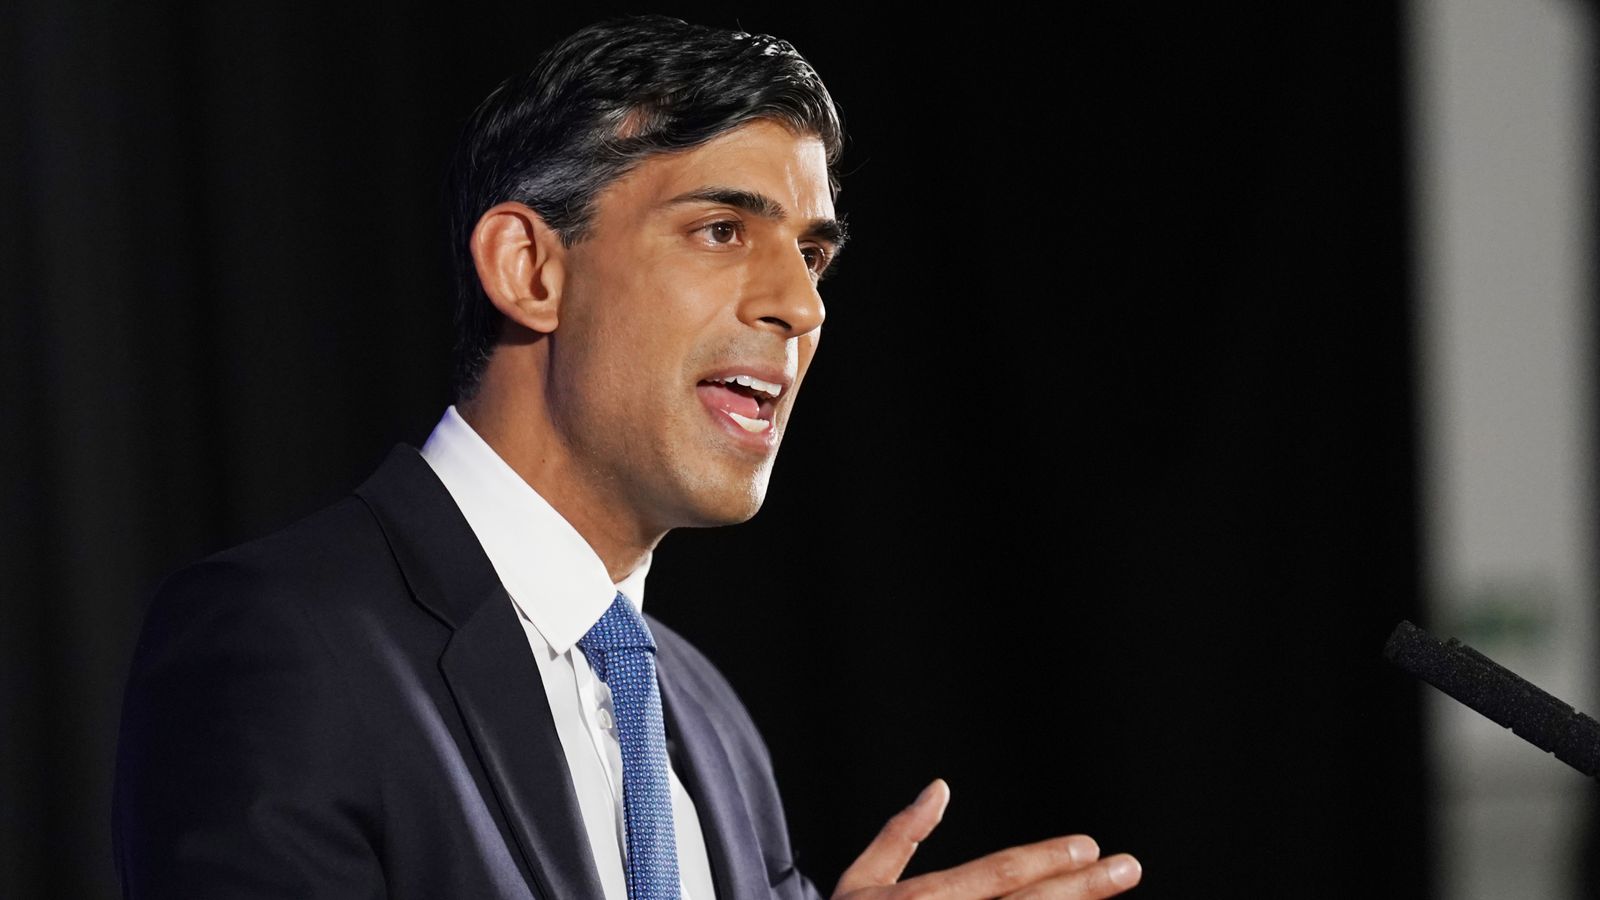 Rishi Sunak's Richmond constituency to receive £19m as latest successful levelling up fund bidders revealed